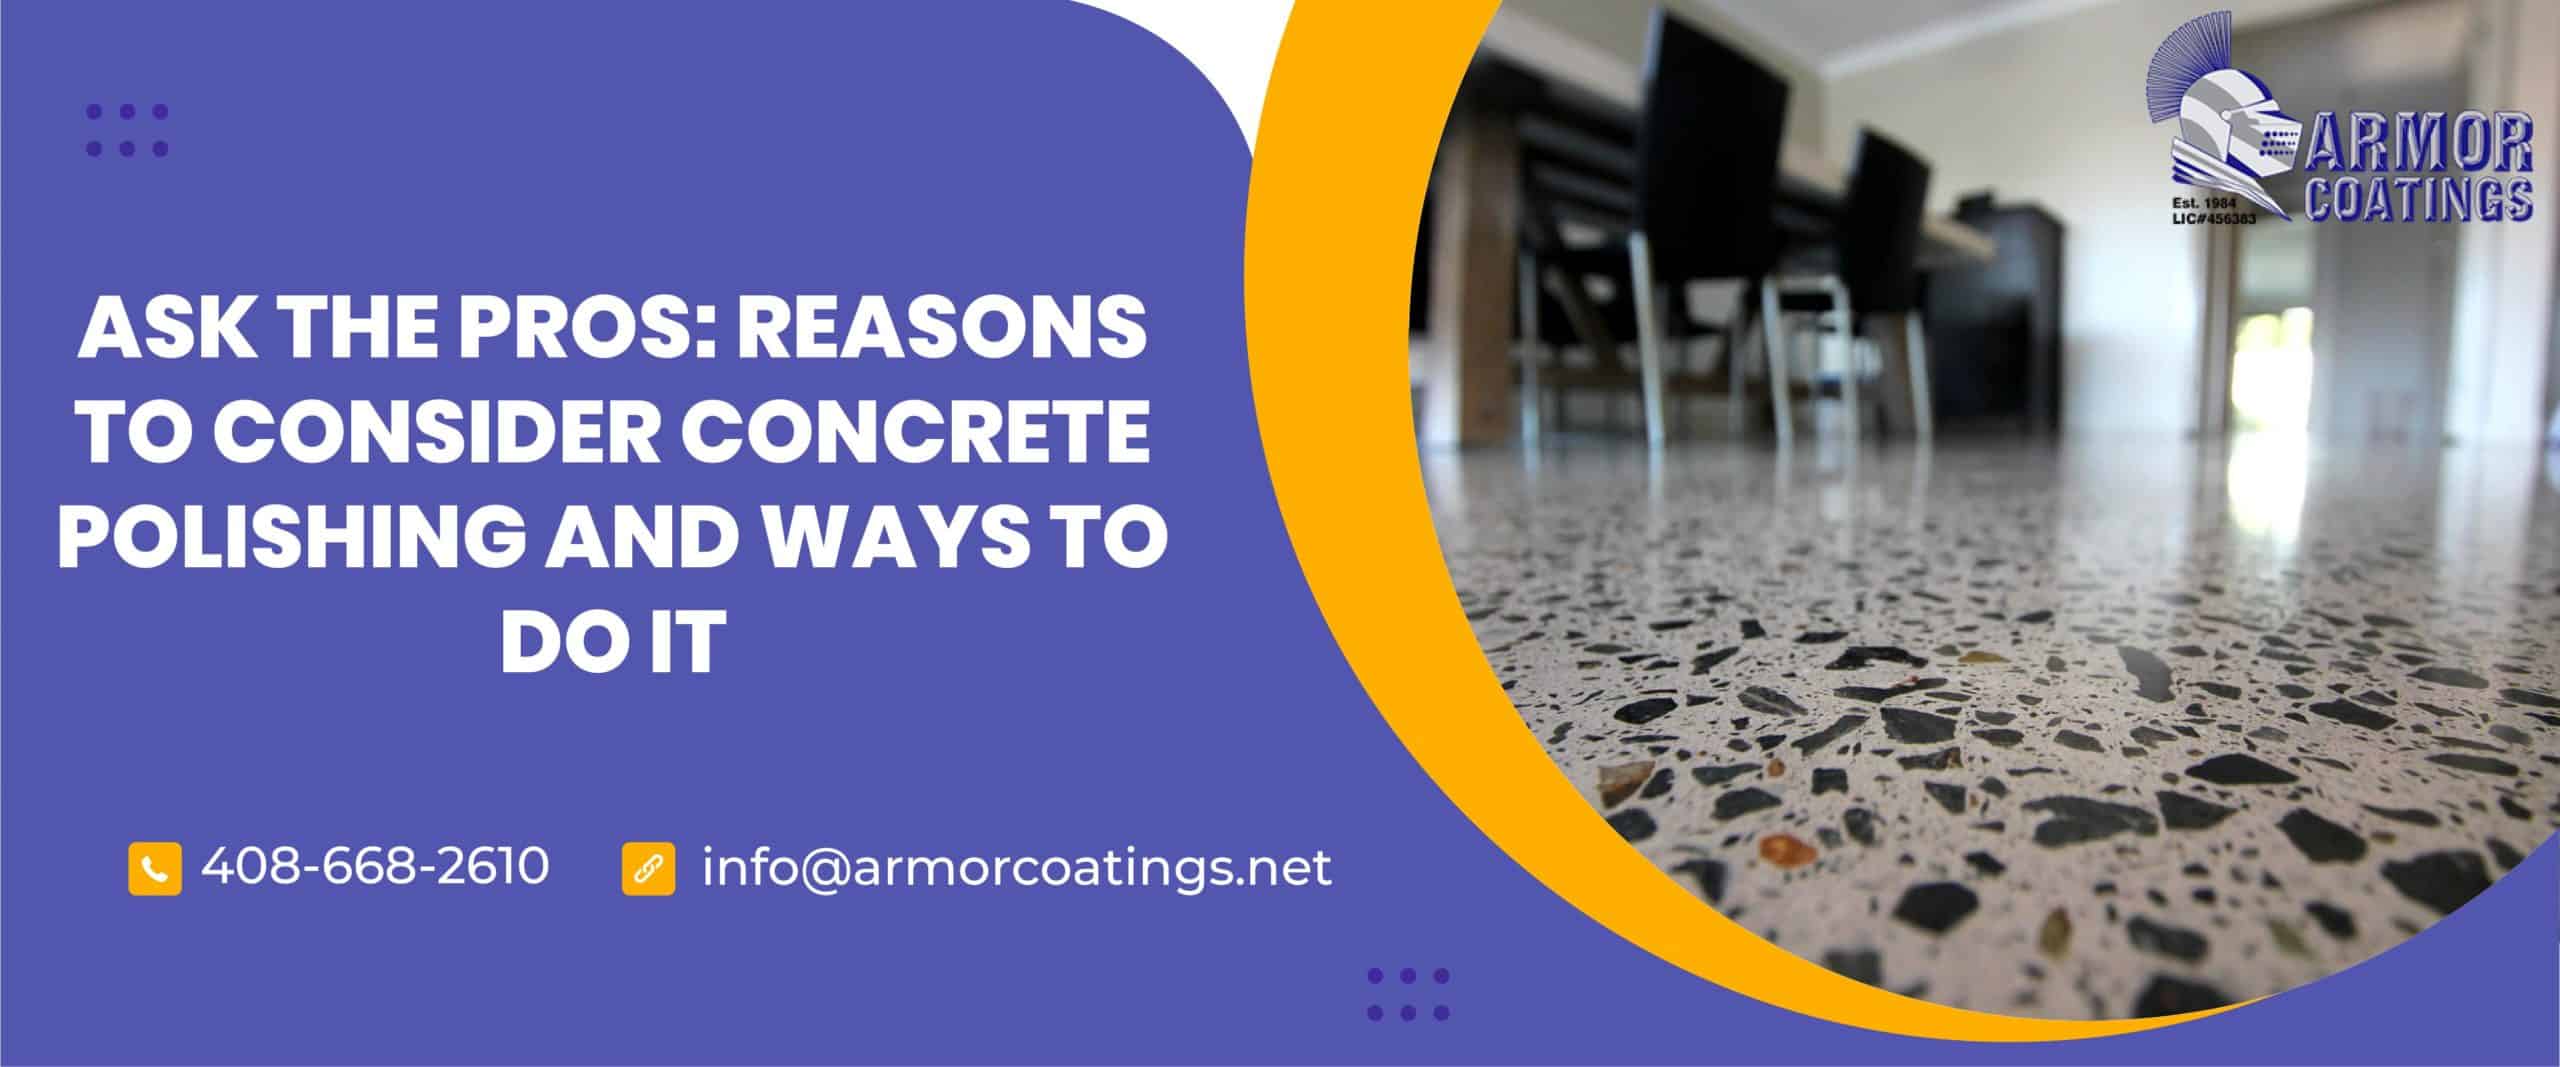 reasons for polished concrete